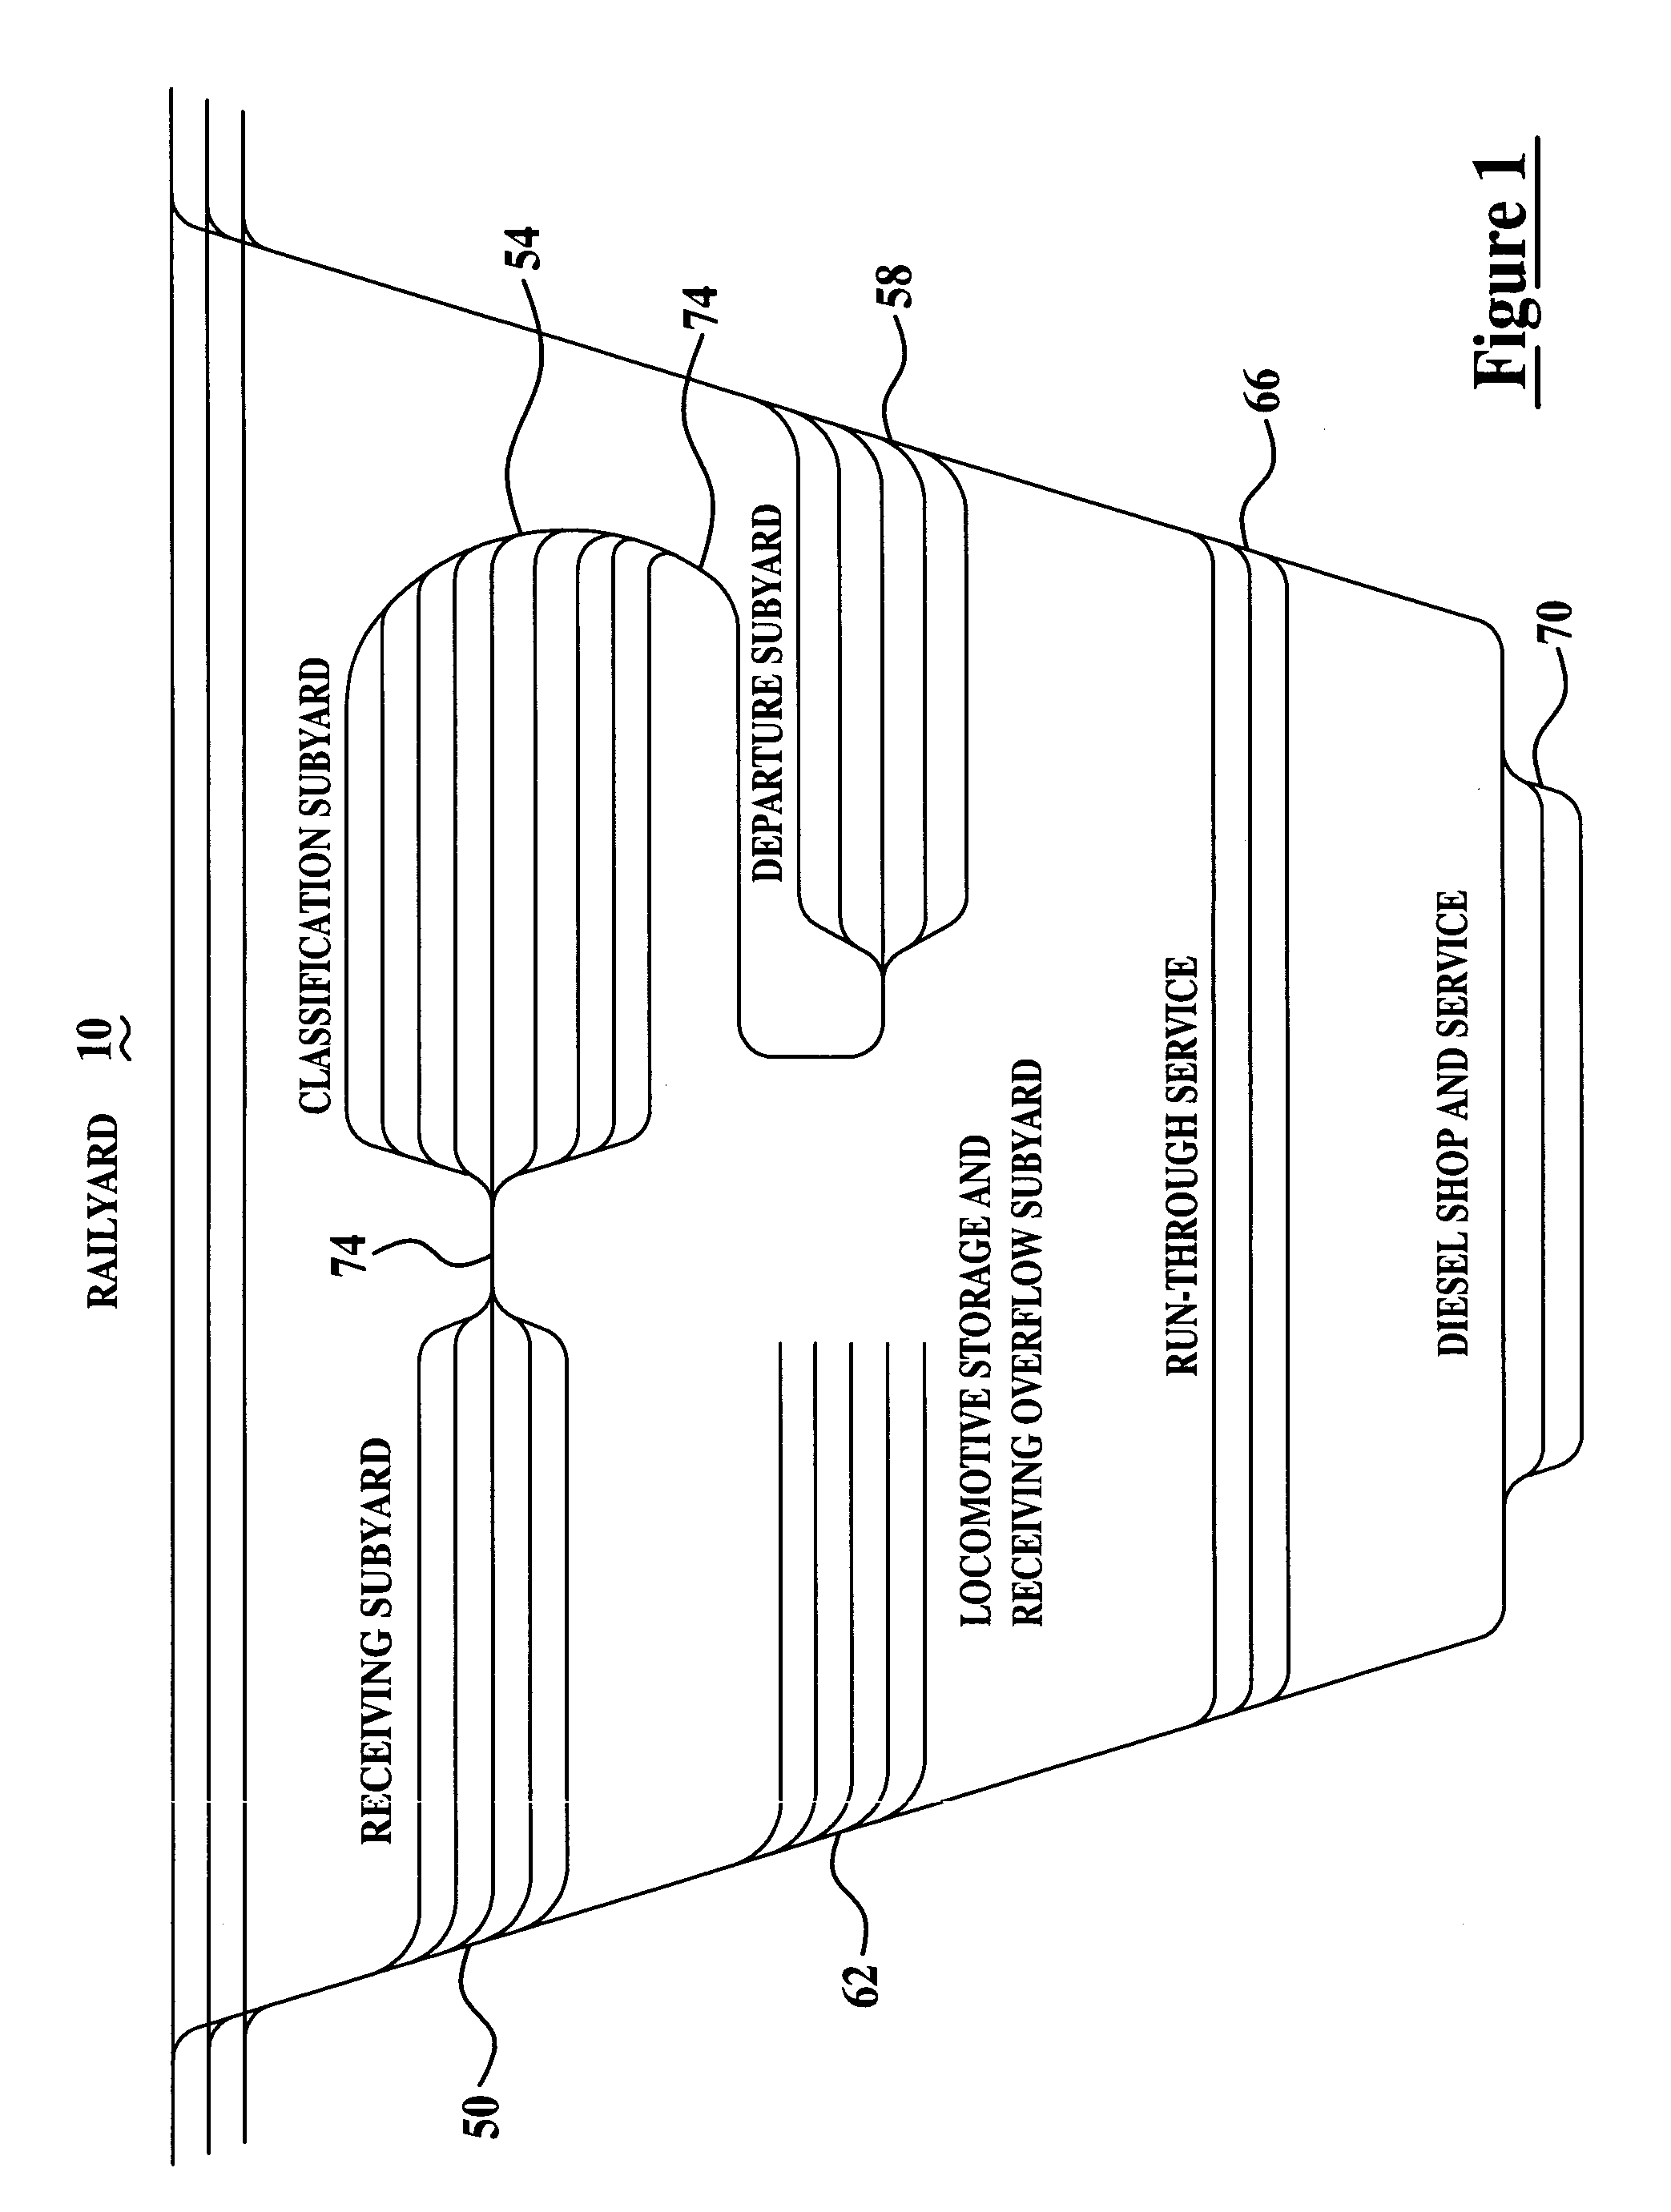 System and method for monitoring train arrival and departure latencies